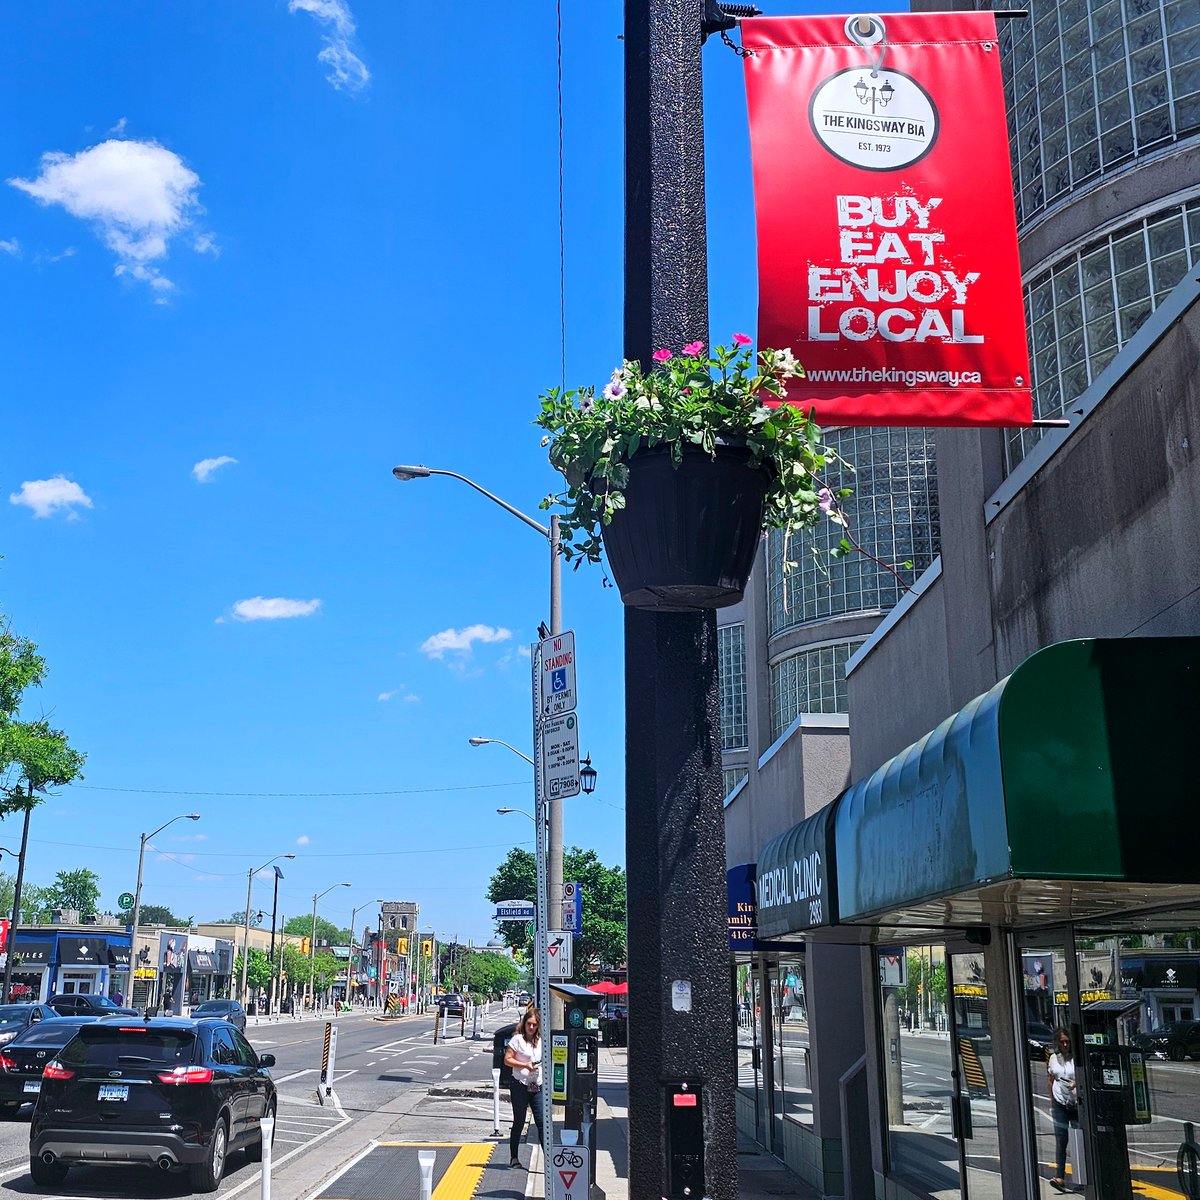 Show your favorite small businesses some love 🖤 What are your go-to spots to shop, dine, and enjoy in The Kingsway BIA? Let us know in the comments below ⬇️ 

#kingswaybia #shoplocal #torontobia #supportsmallbusiness